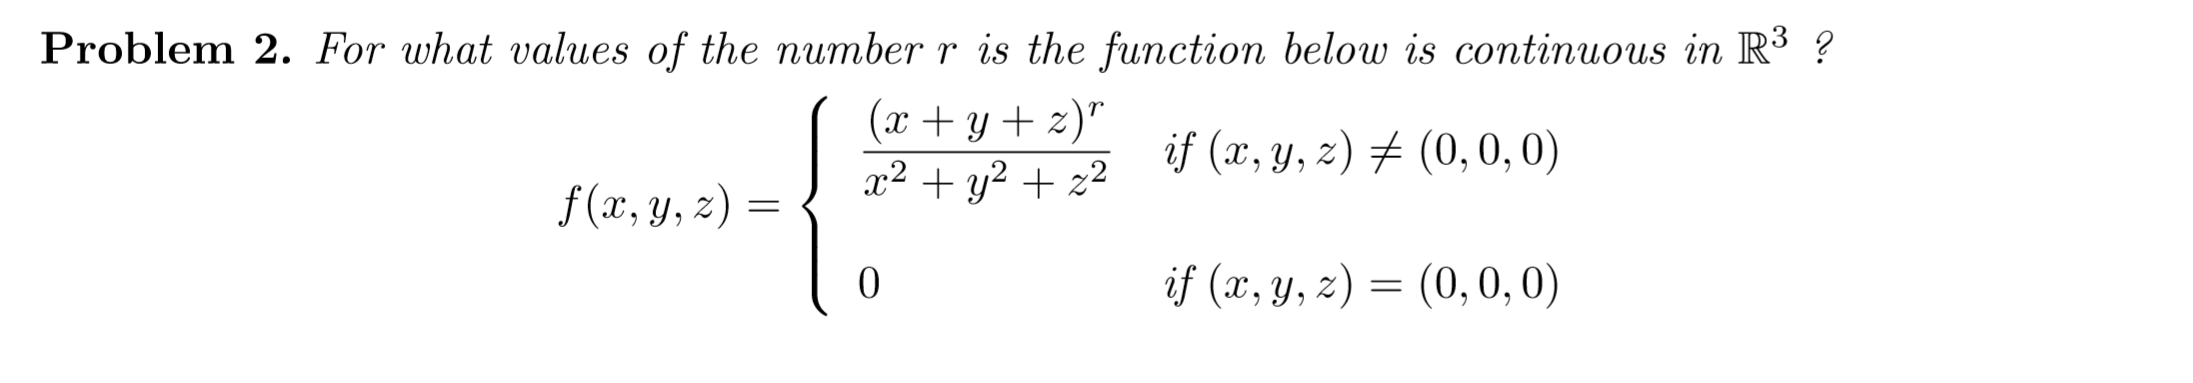 Problem 2. For what values of the number r is the function below is continuous in R³ ?
(x+y + z)"
x2 + y2 + z2
if (x, y, z) # (0,0,0)
f (x, y, z) =
if (x, y, z) =
(0,0,0)
